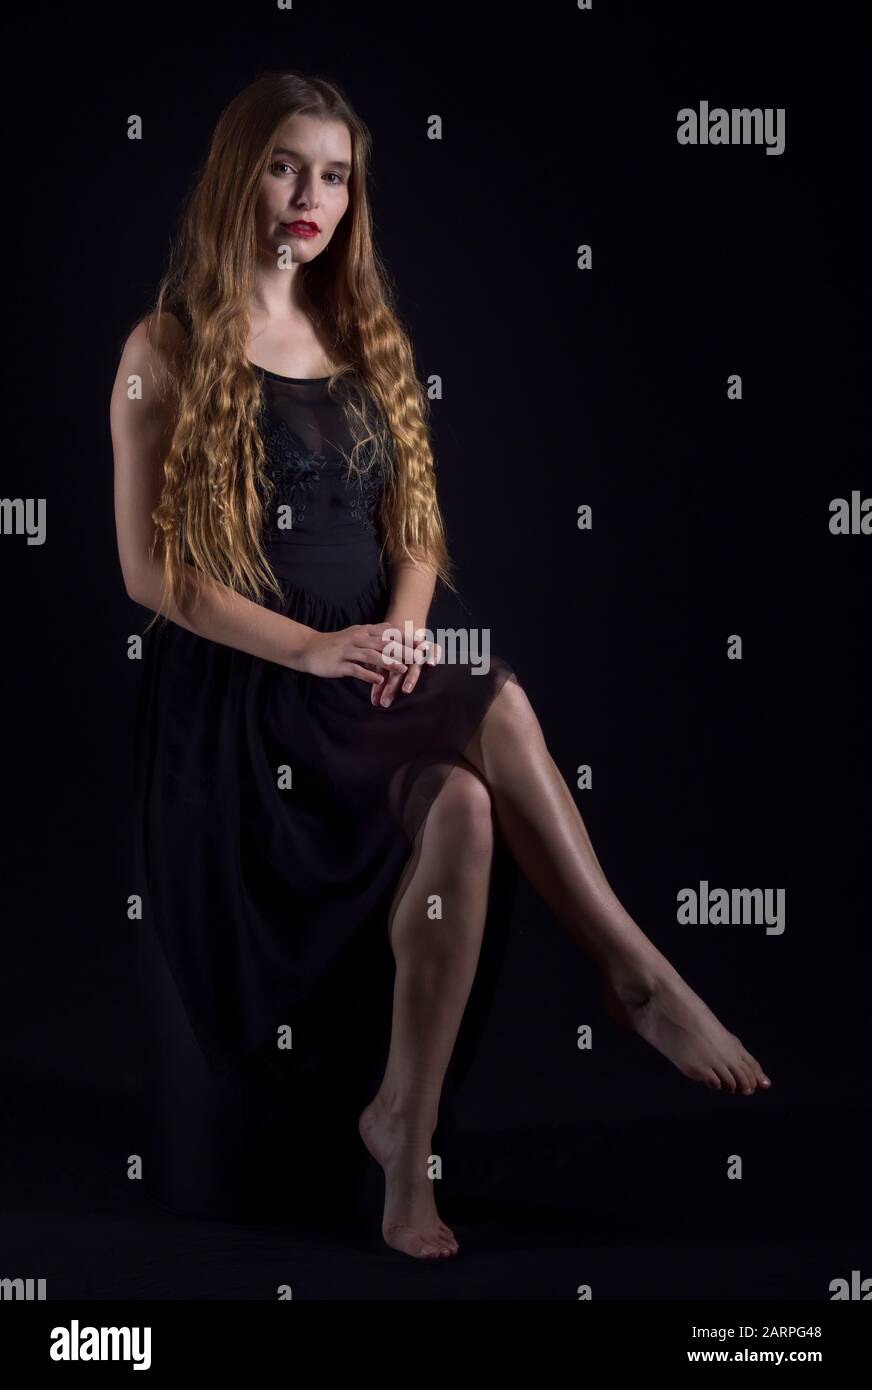 Attractive woman posing in a black dress in a studio setting Stock Photo